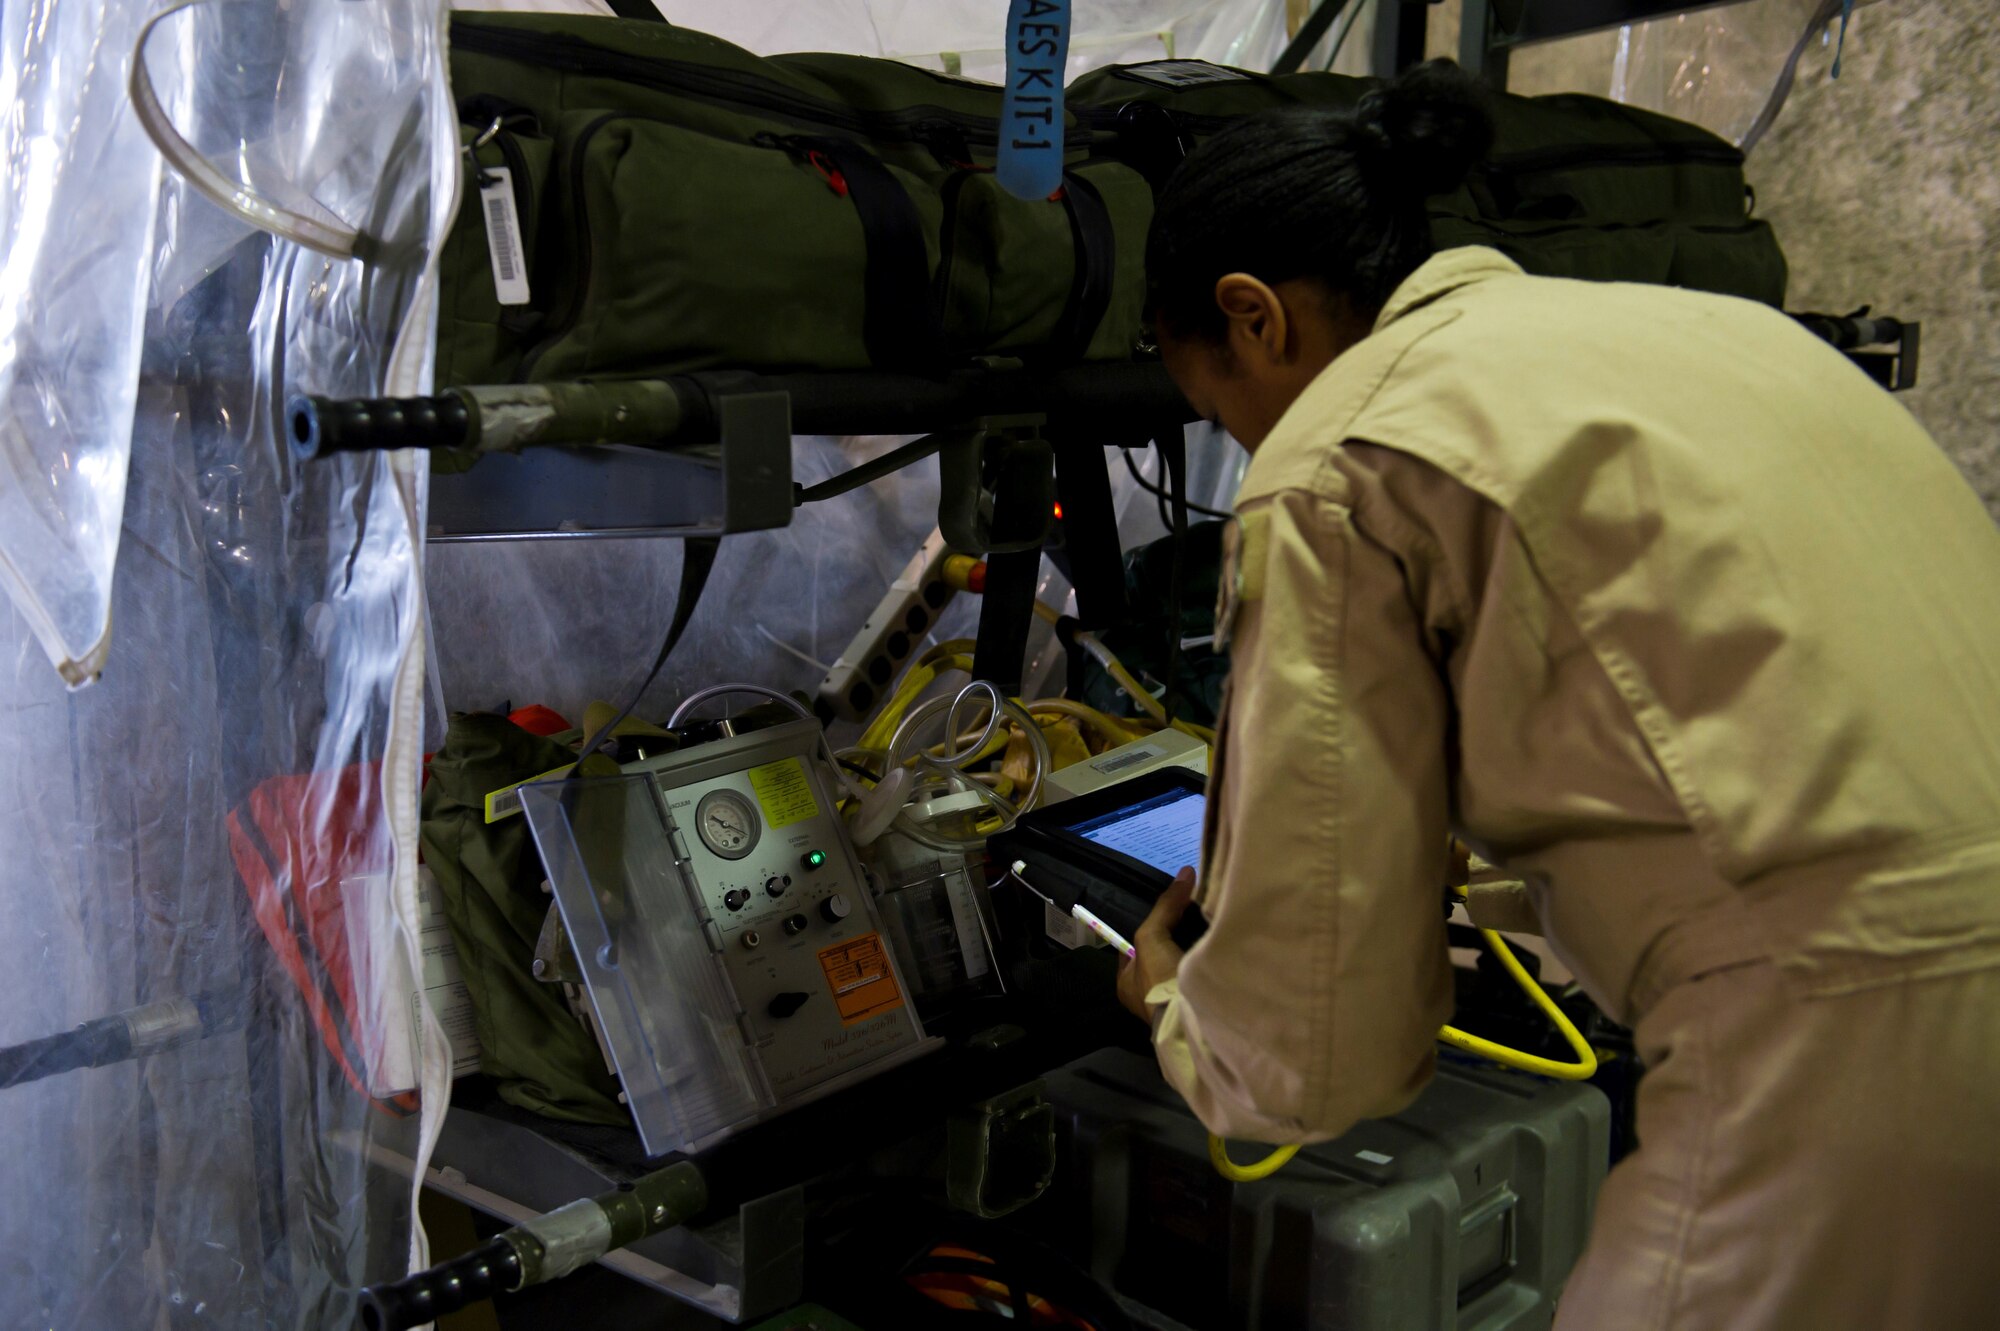 U.S. Air Force Staff Sgt. Yeneesa Simpson, 379th Expeditionary Aeromedical Evacuation Squadron medical technician, performs a routine checklist on items needed for a patient transfer mission, July 19, 2013, at an undisclosed location in Southwest Asia. The EAES teams are needed to transport patients to medical facilities from remote deployed locations for additional treatment. Simpson, a native of Athens, Tenn., is deployed from the 43rd Aeromedical Evacuation Squadron, Pope Air Force Base, NC. (U.S. Air Force photo/Staff Sgt. Marleah Miller)